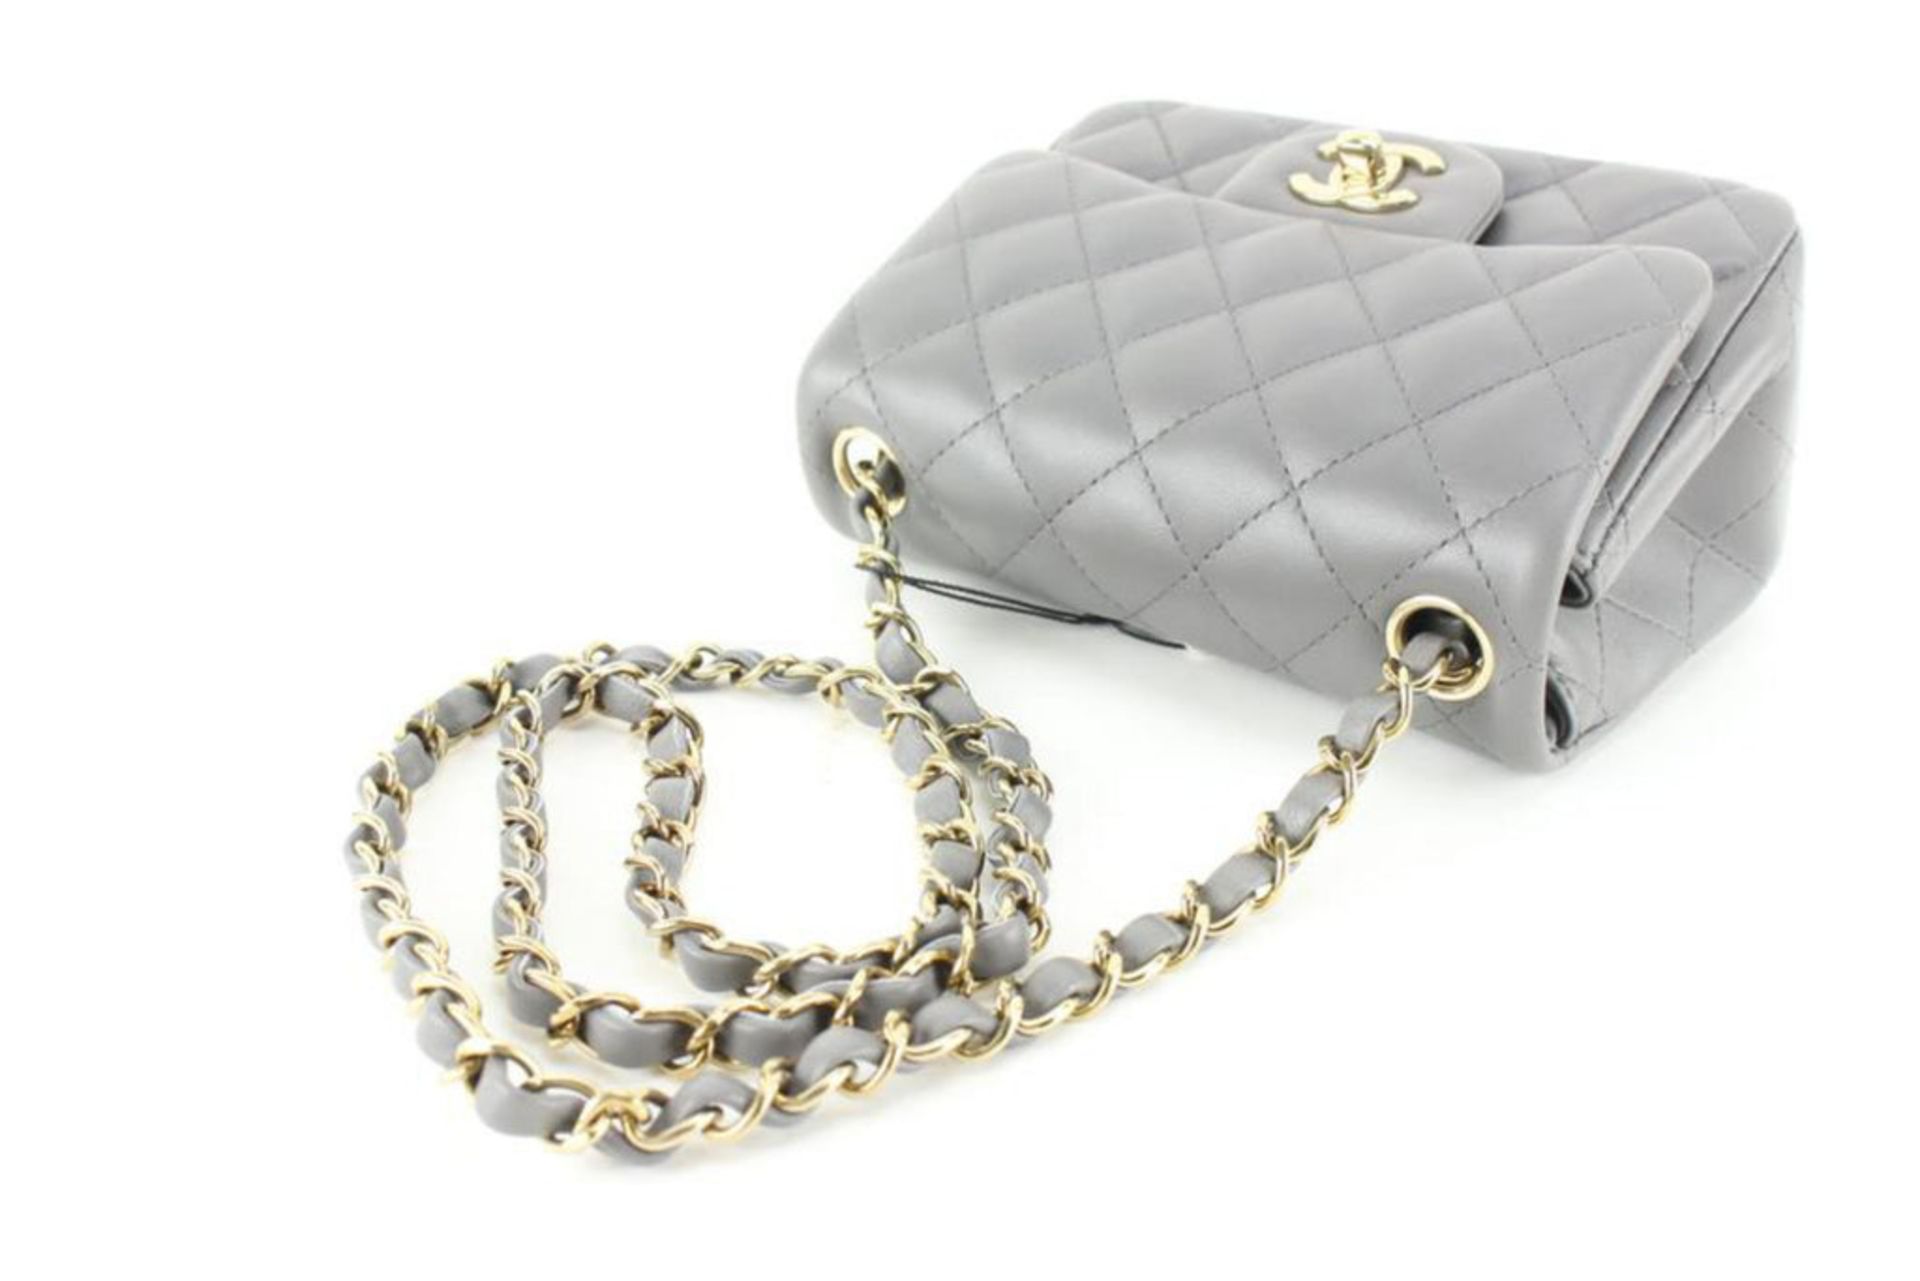 CHANEL QUILTED DARK GREY LAMBSKIN SQUARE MINI CLASSIC FLAP GHW - Image 9 of 11